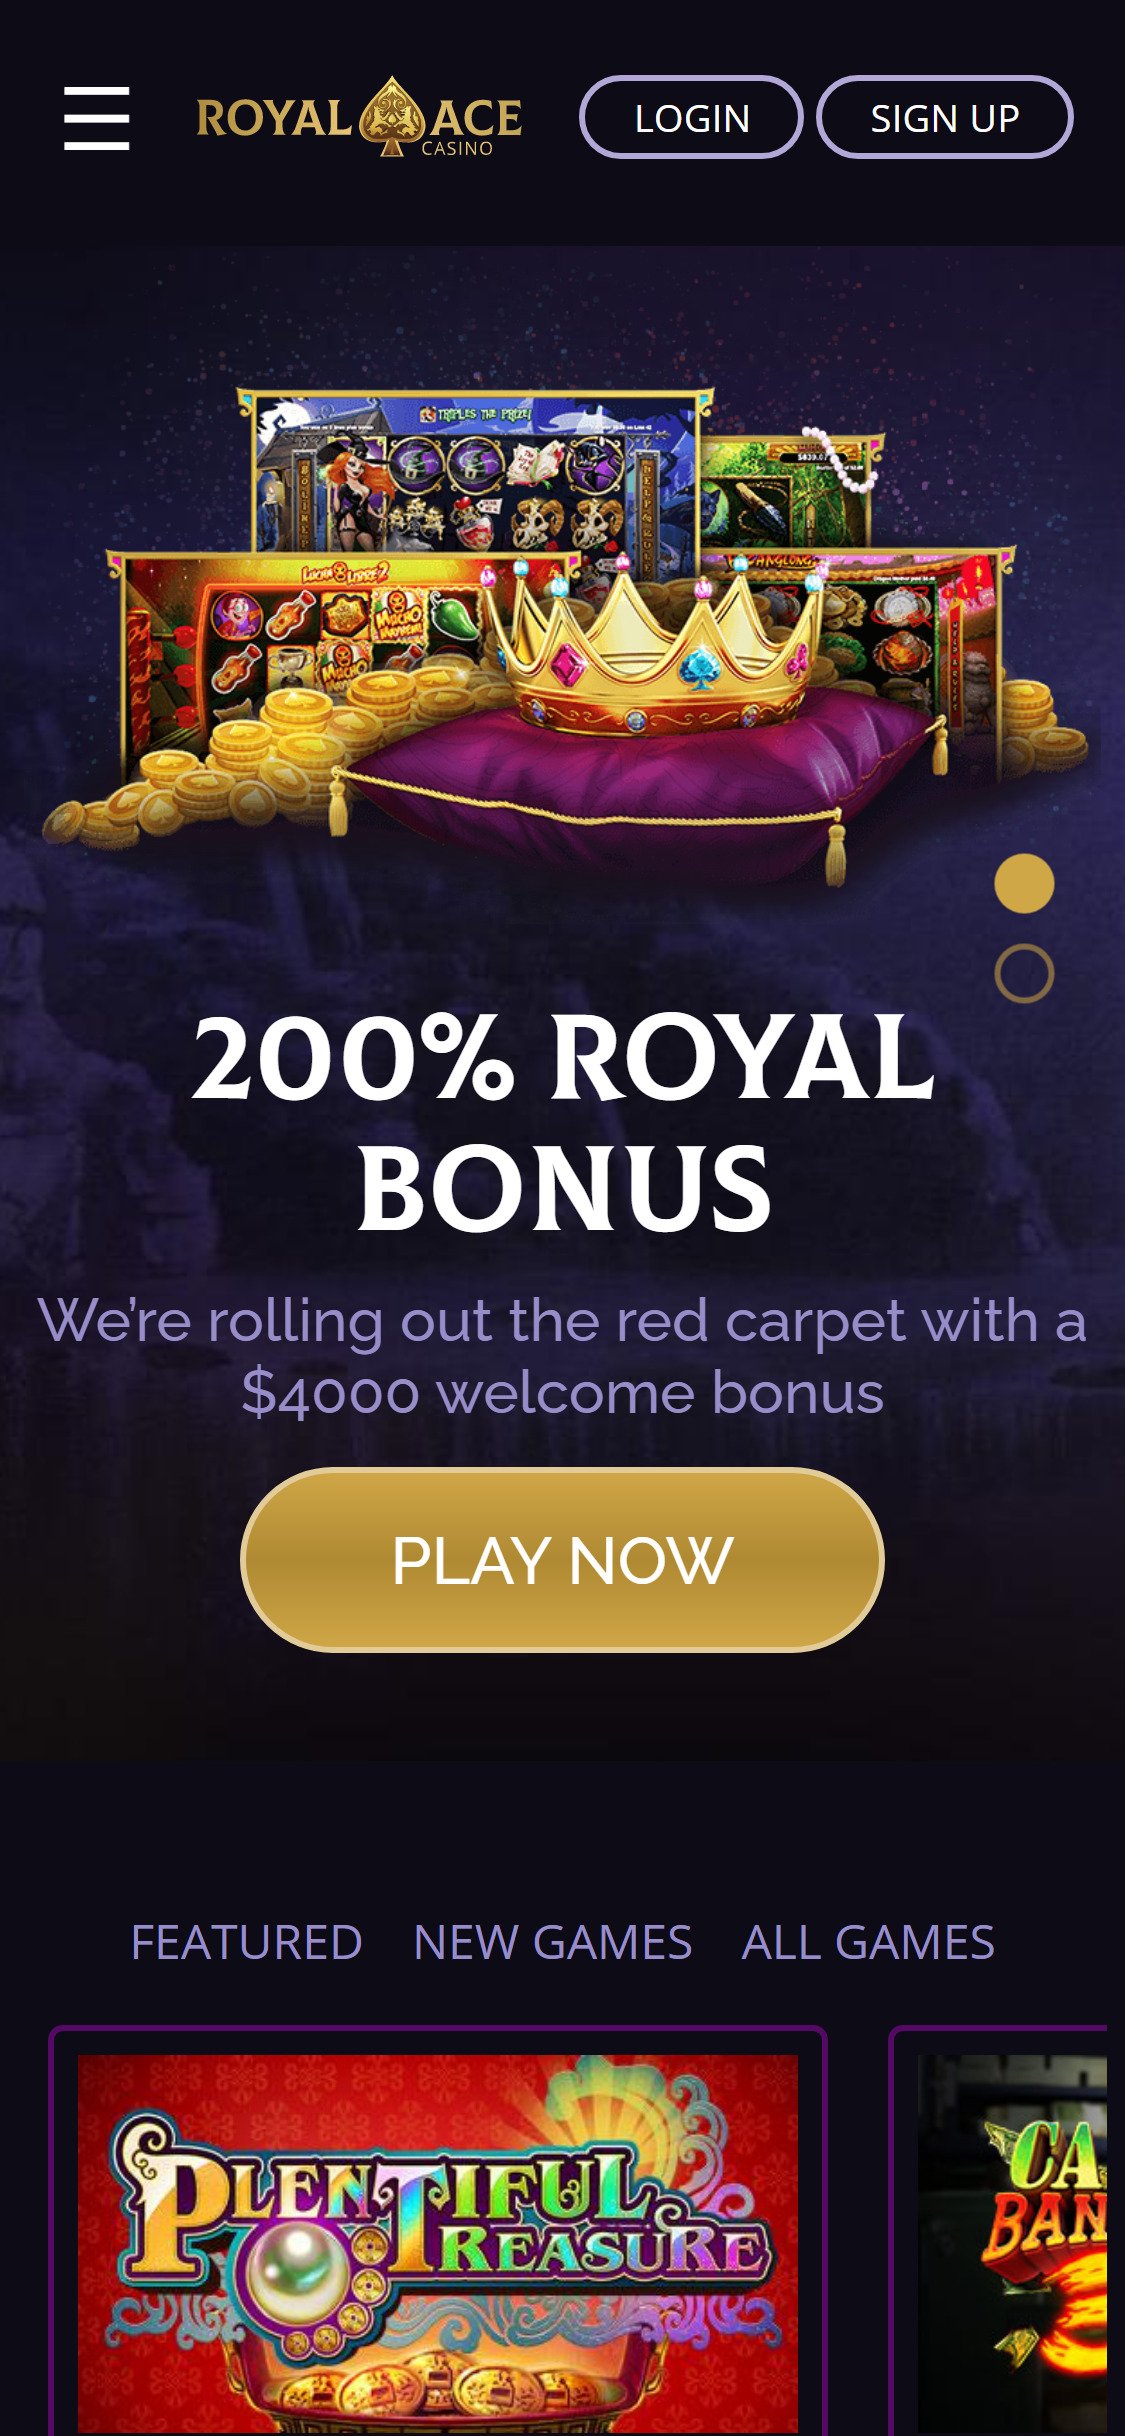 Royal Ace Casino Mobile Review